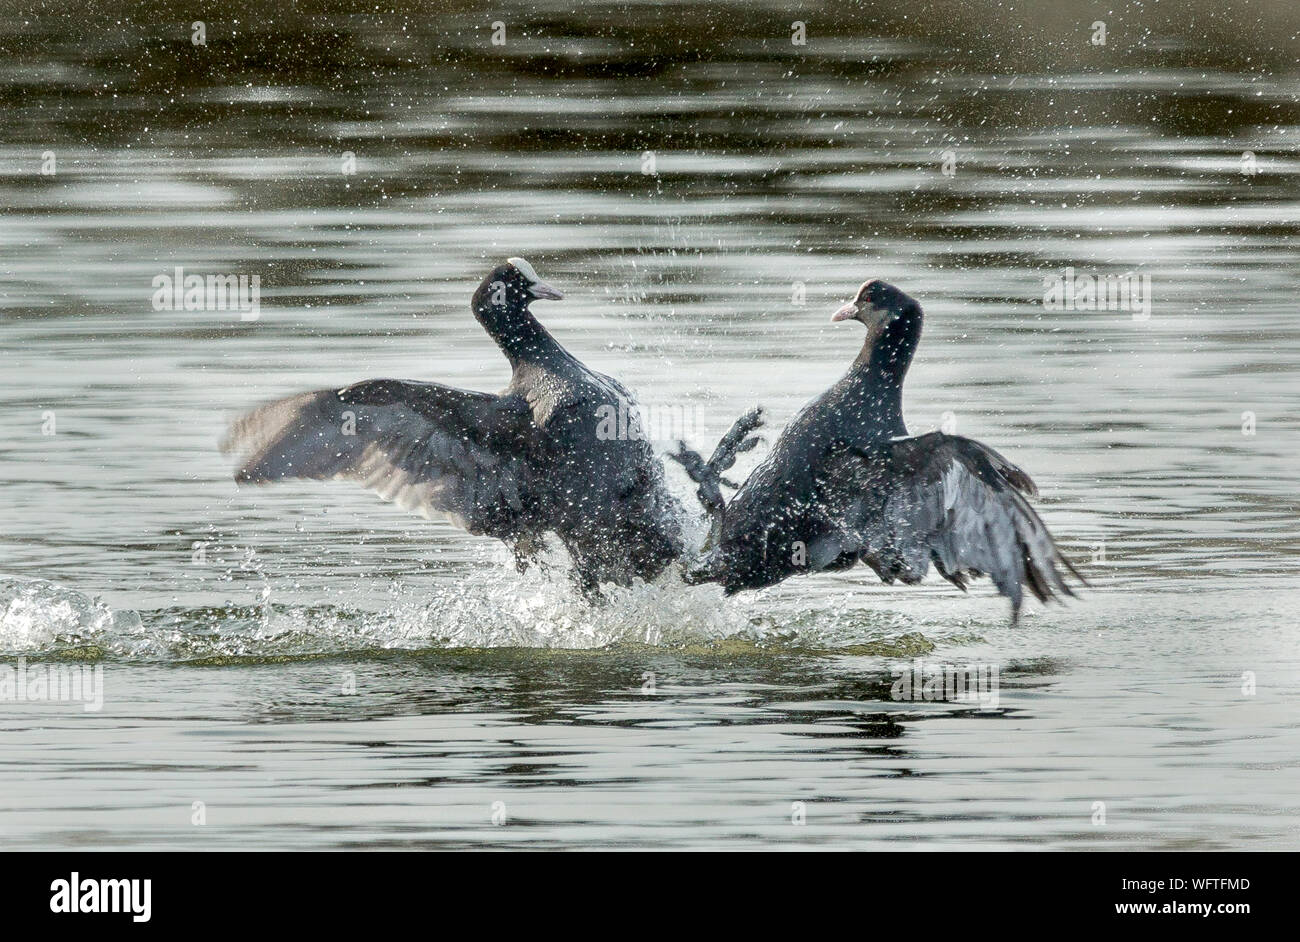 View Of Birds In Water Stock Photo - Alamy